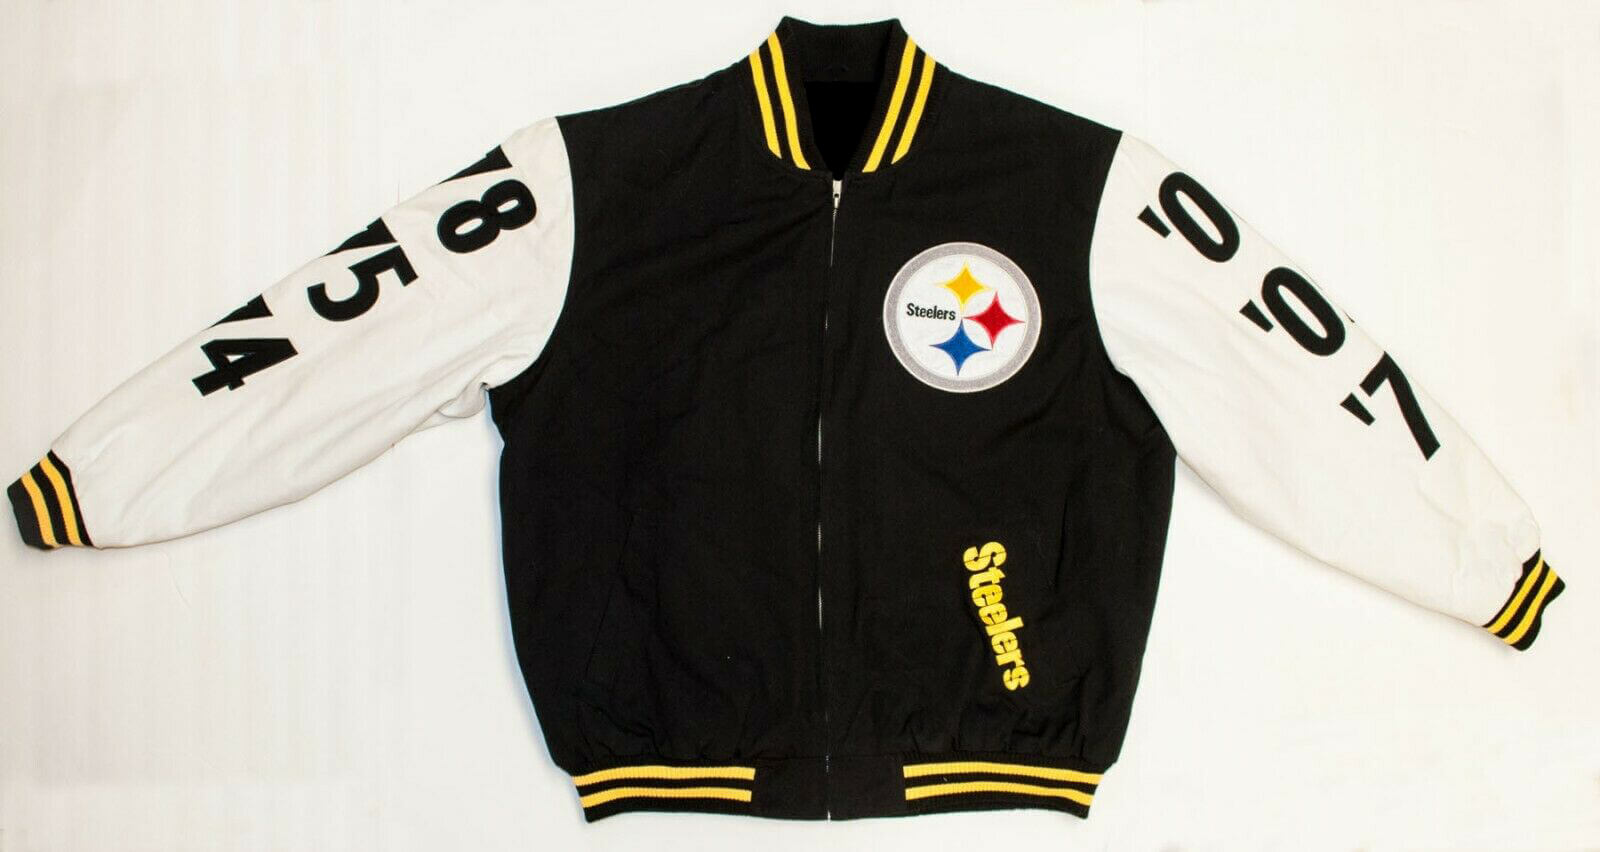 PITTSBURGH STEELERS GLADIATOR STUDDED SLEEVE DETAIL MODERATE LENGTH SH